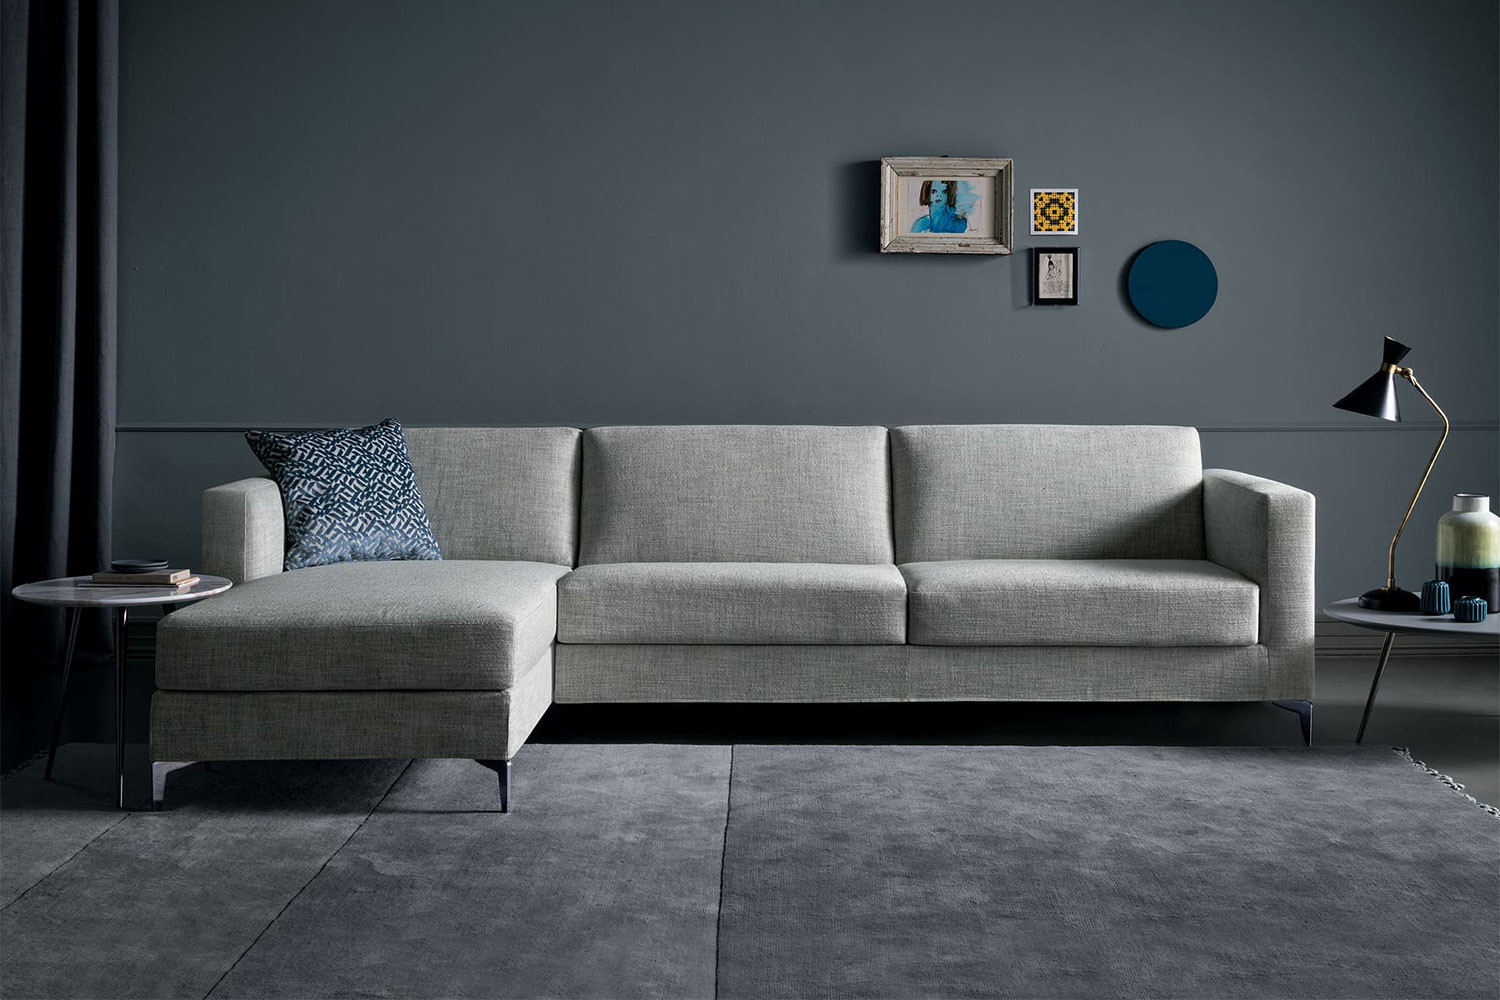 High sectional sofa bed with tapered metal legs Richard